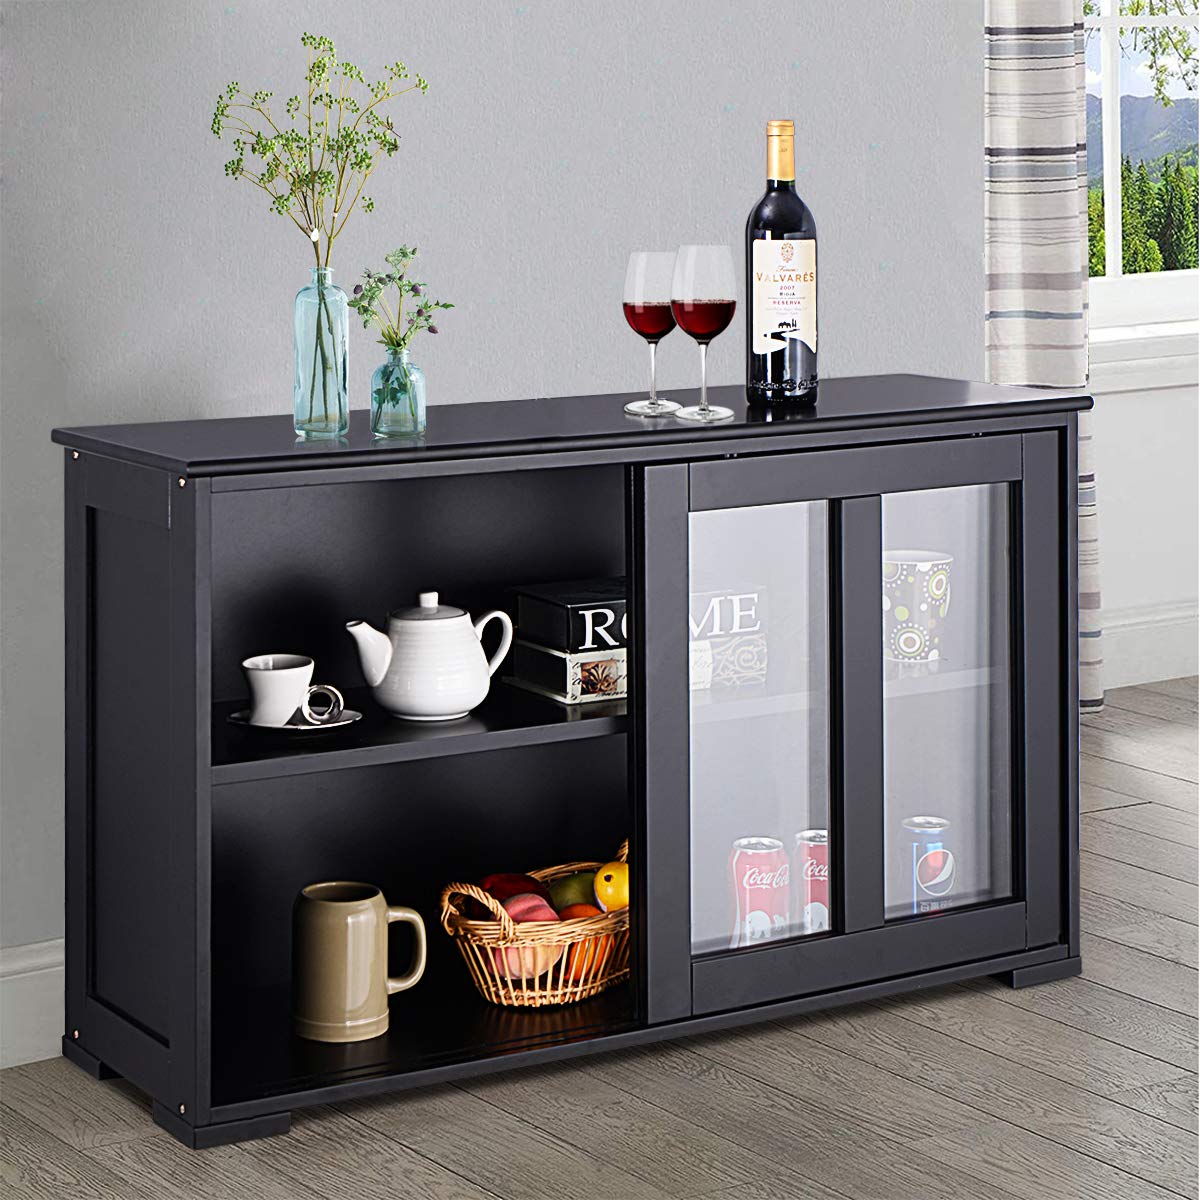 Costzon Kitchen Storage Sideboard, Antique Stackable Cabinet for Home Cupboard Buffet Dining Room (Black Sideboard with Sliding Door Window)